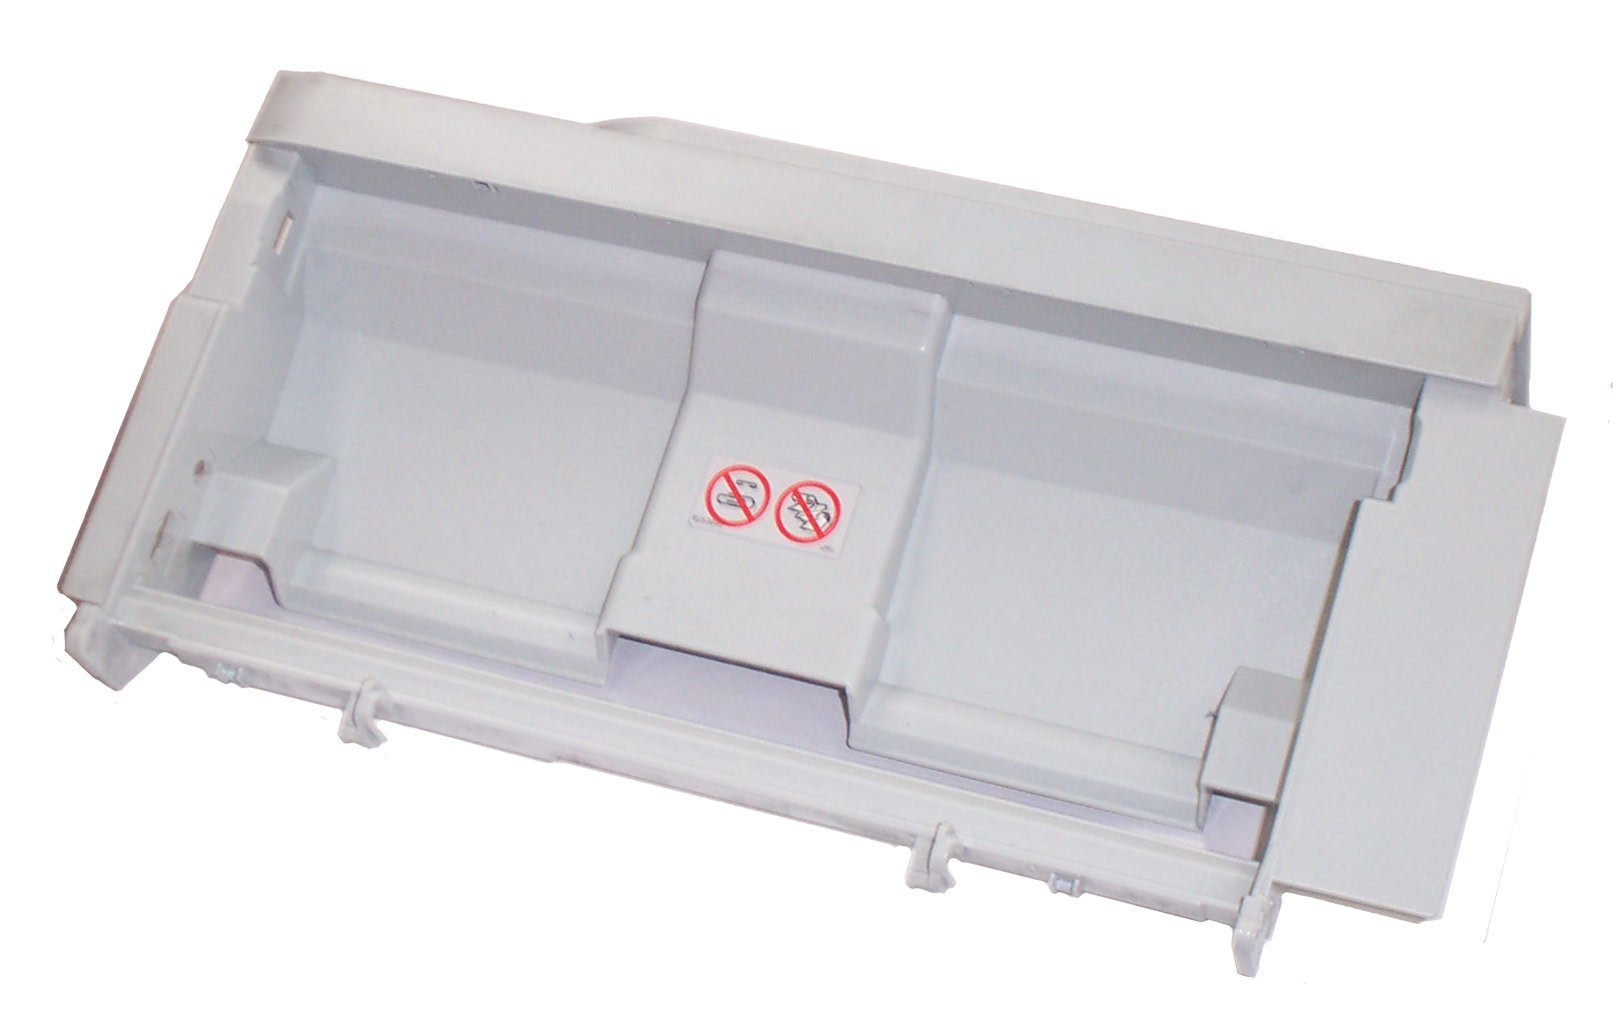 HP Refurbished RM1-6264 Cartridge Access Door Assembly - Door that provides access to the cartridge